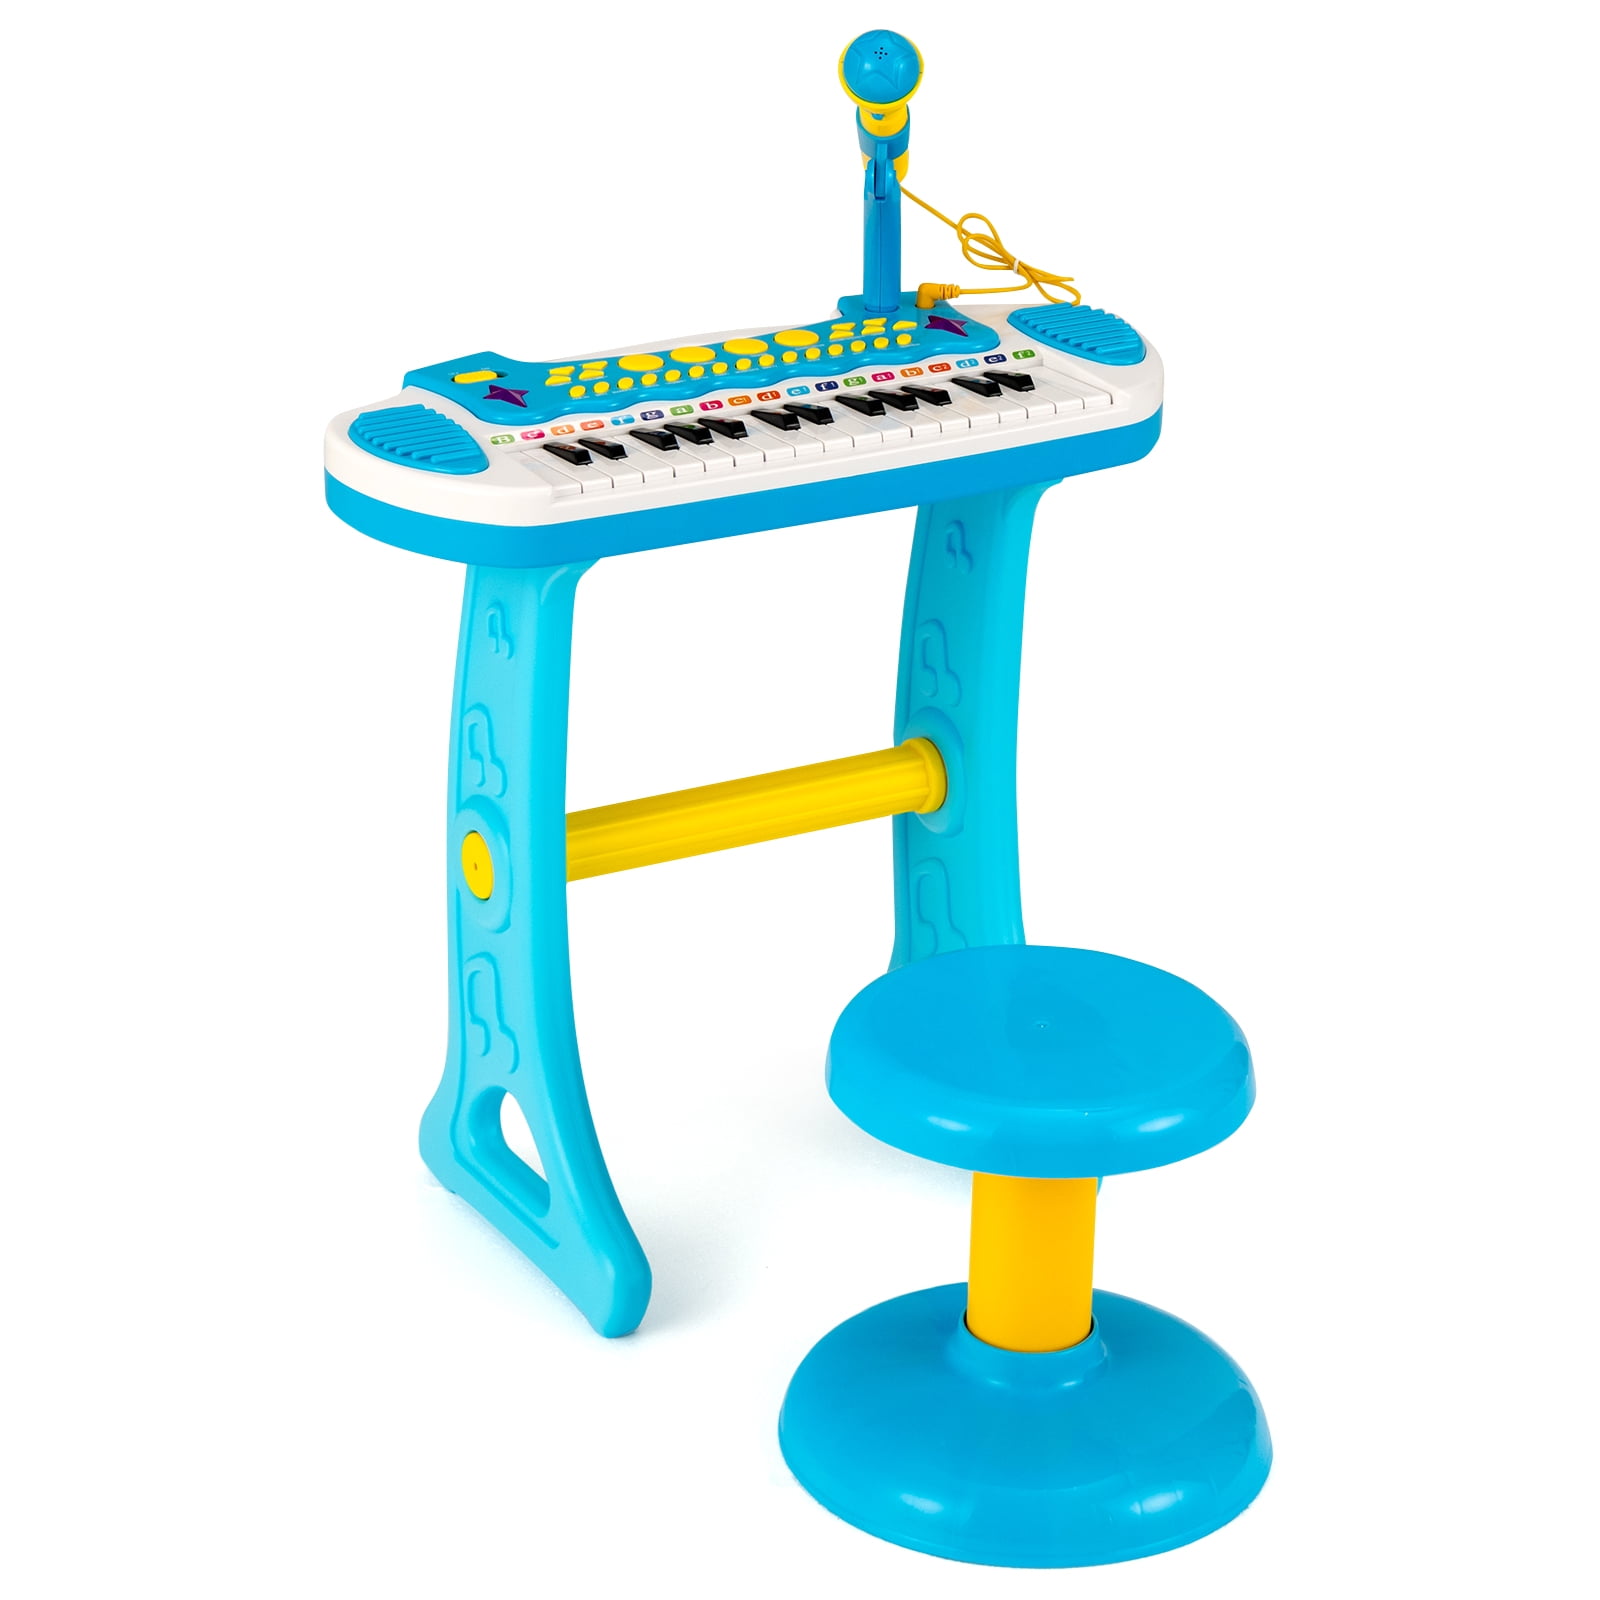 Infans 31 Key Kids Piano Keyboard Toy Toddler Musical Instrument w ...